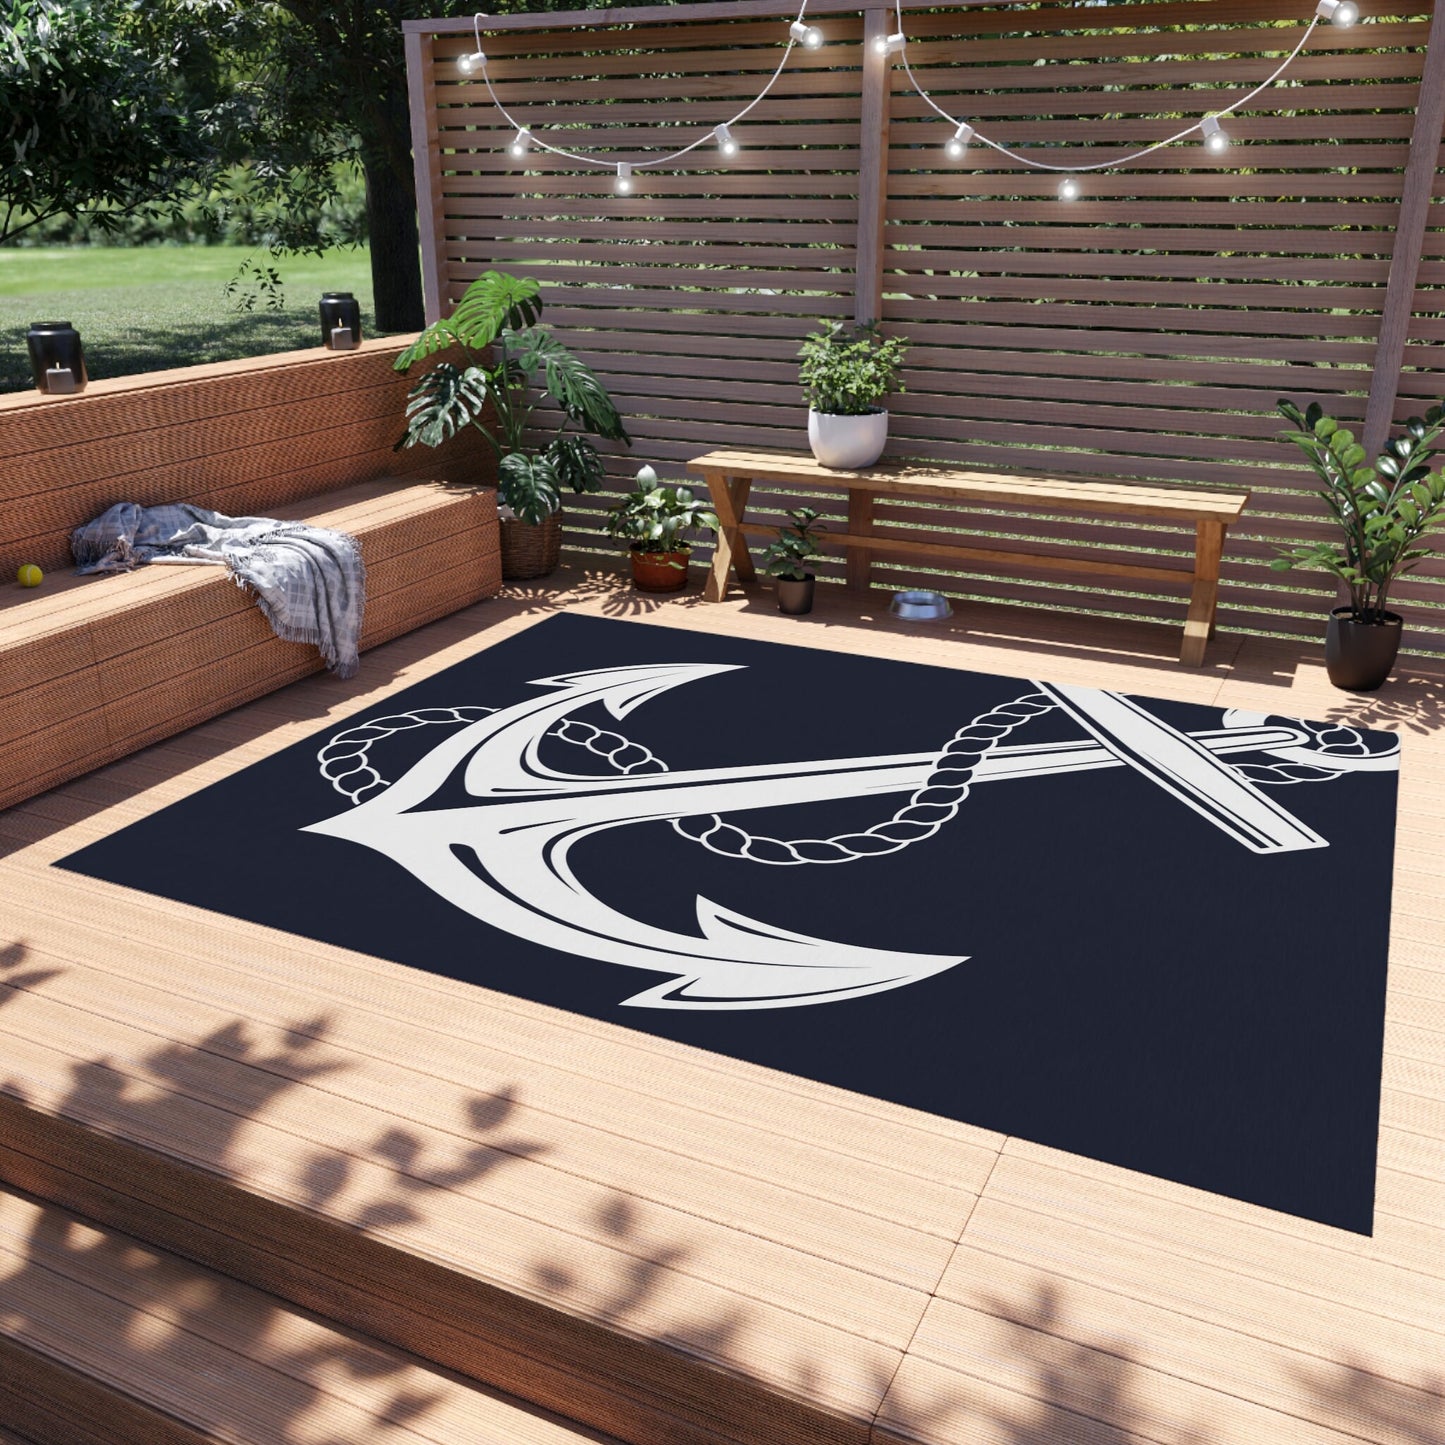 Anchor Outdoor Rug Nautical Patio Rugs navy white Porch rugs 2x3 5x7 large 8x10 9x12